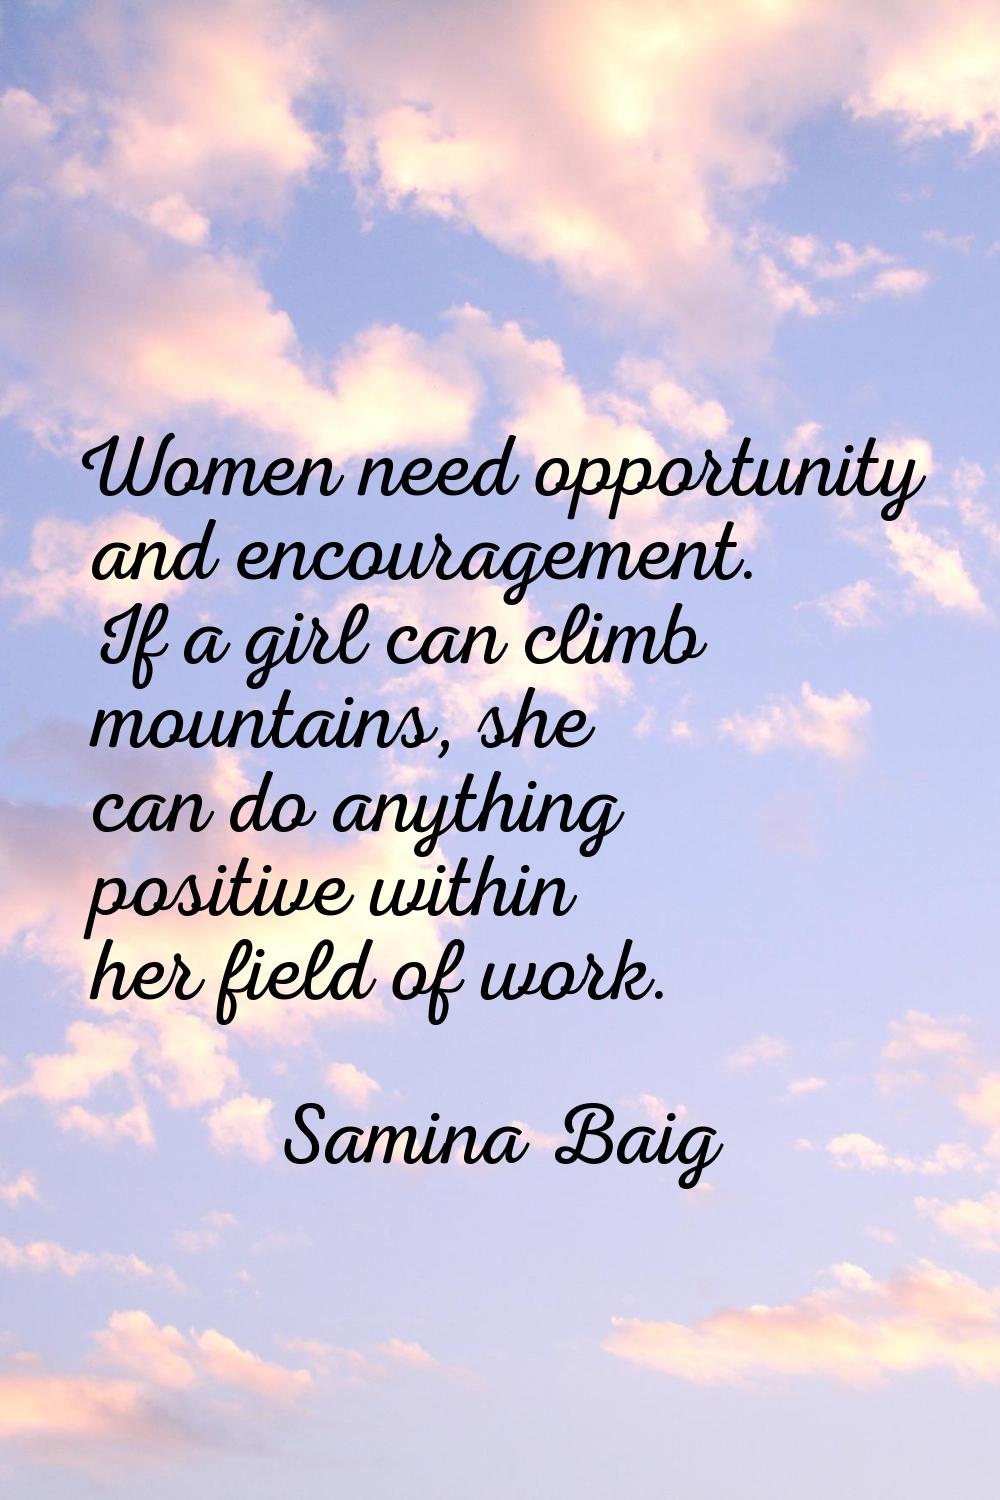 Women need opportunity and encouragement. If a girl can climb mountains, she can do anything positi